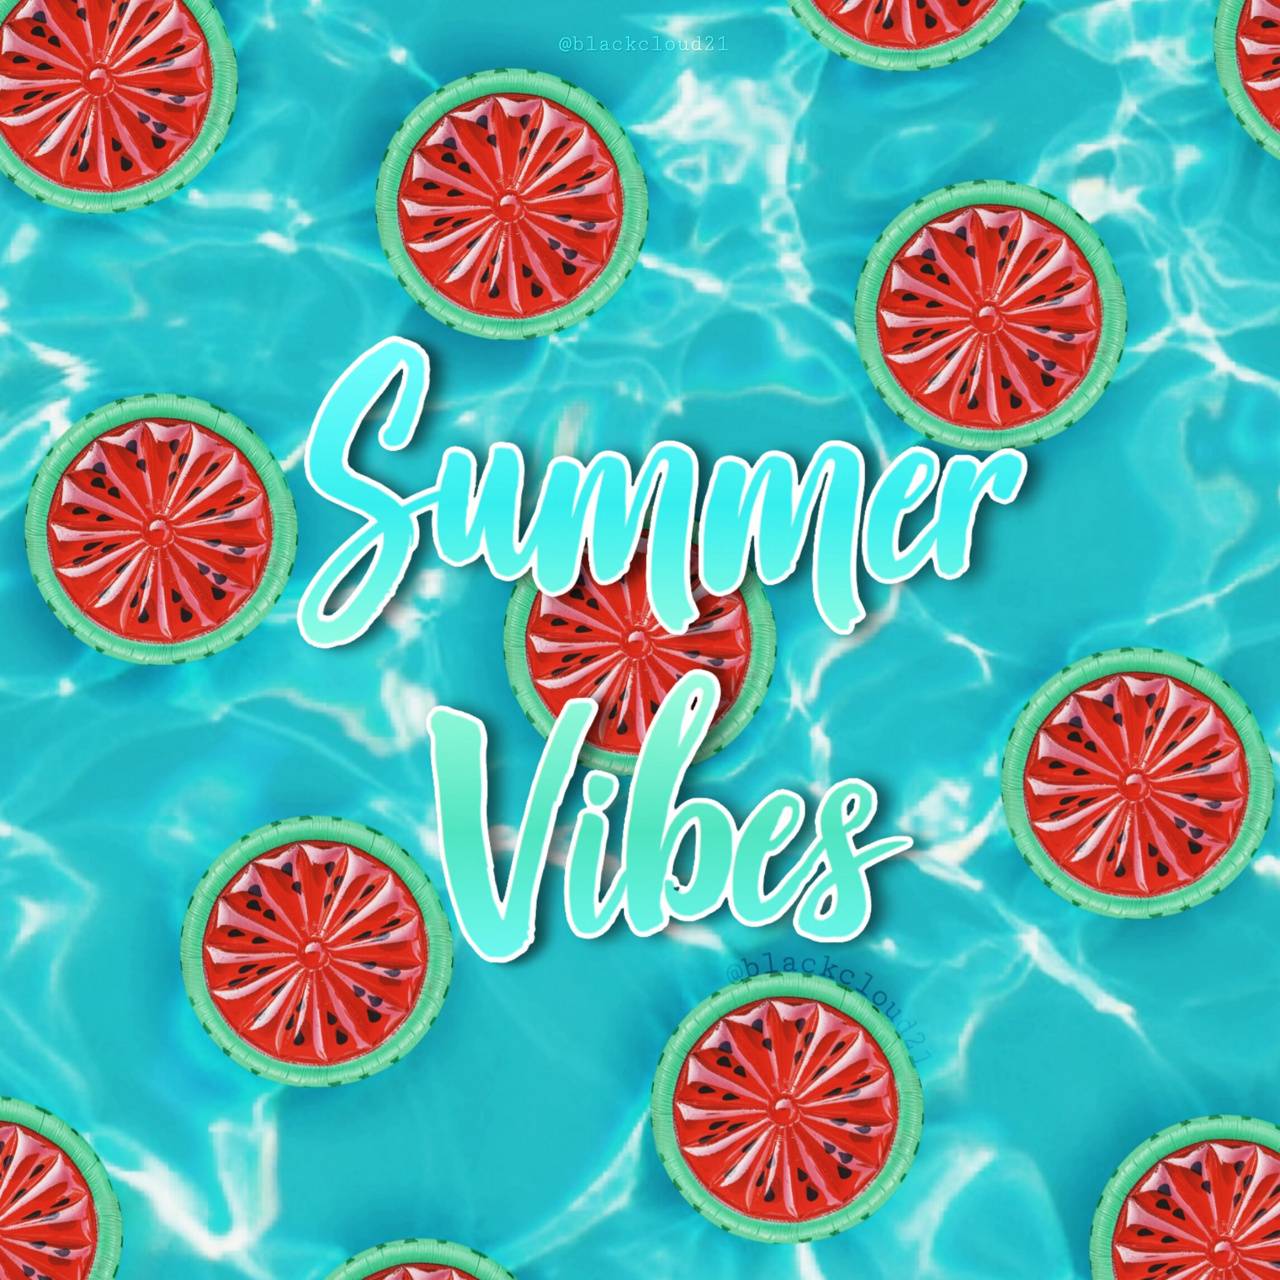 Summer vibes wallpapers by JazzyYazzy123